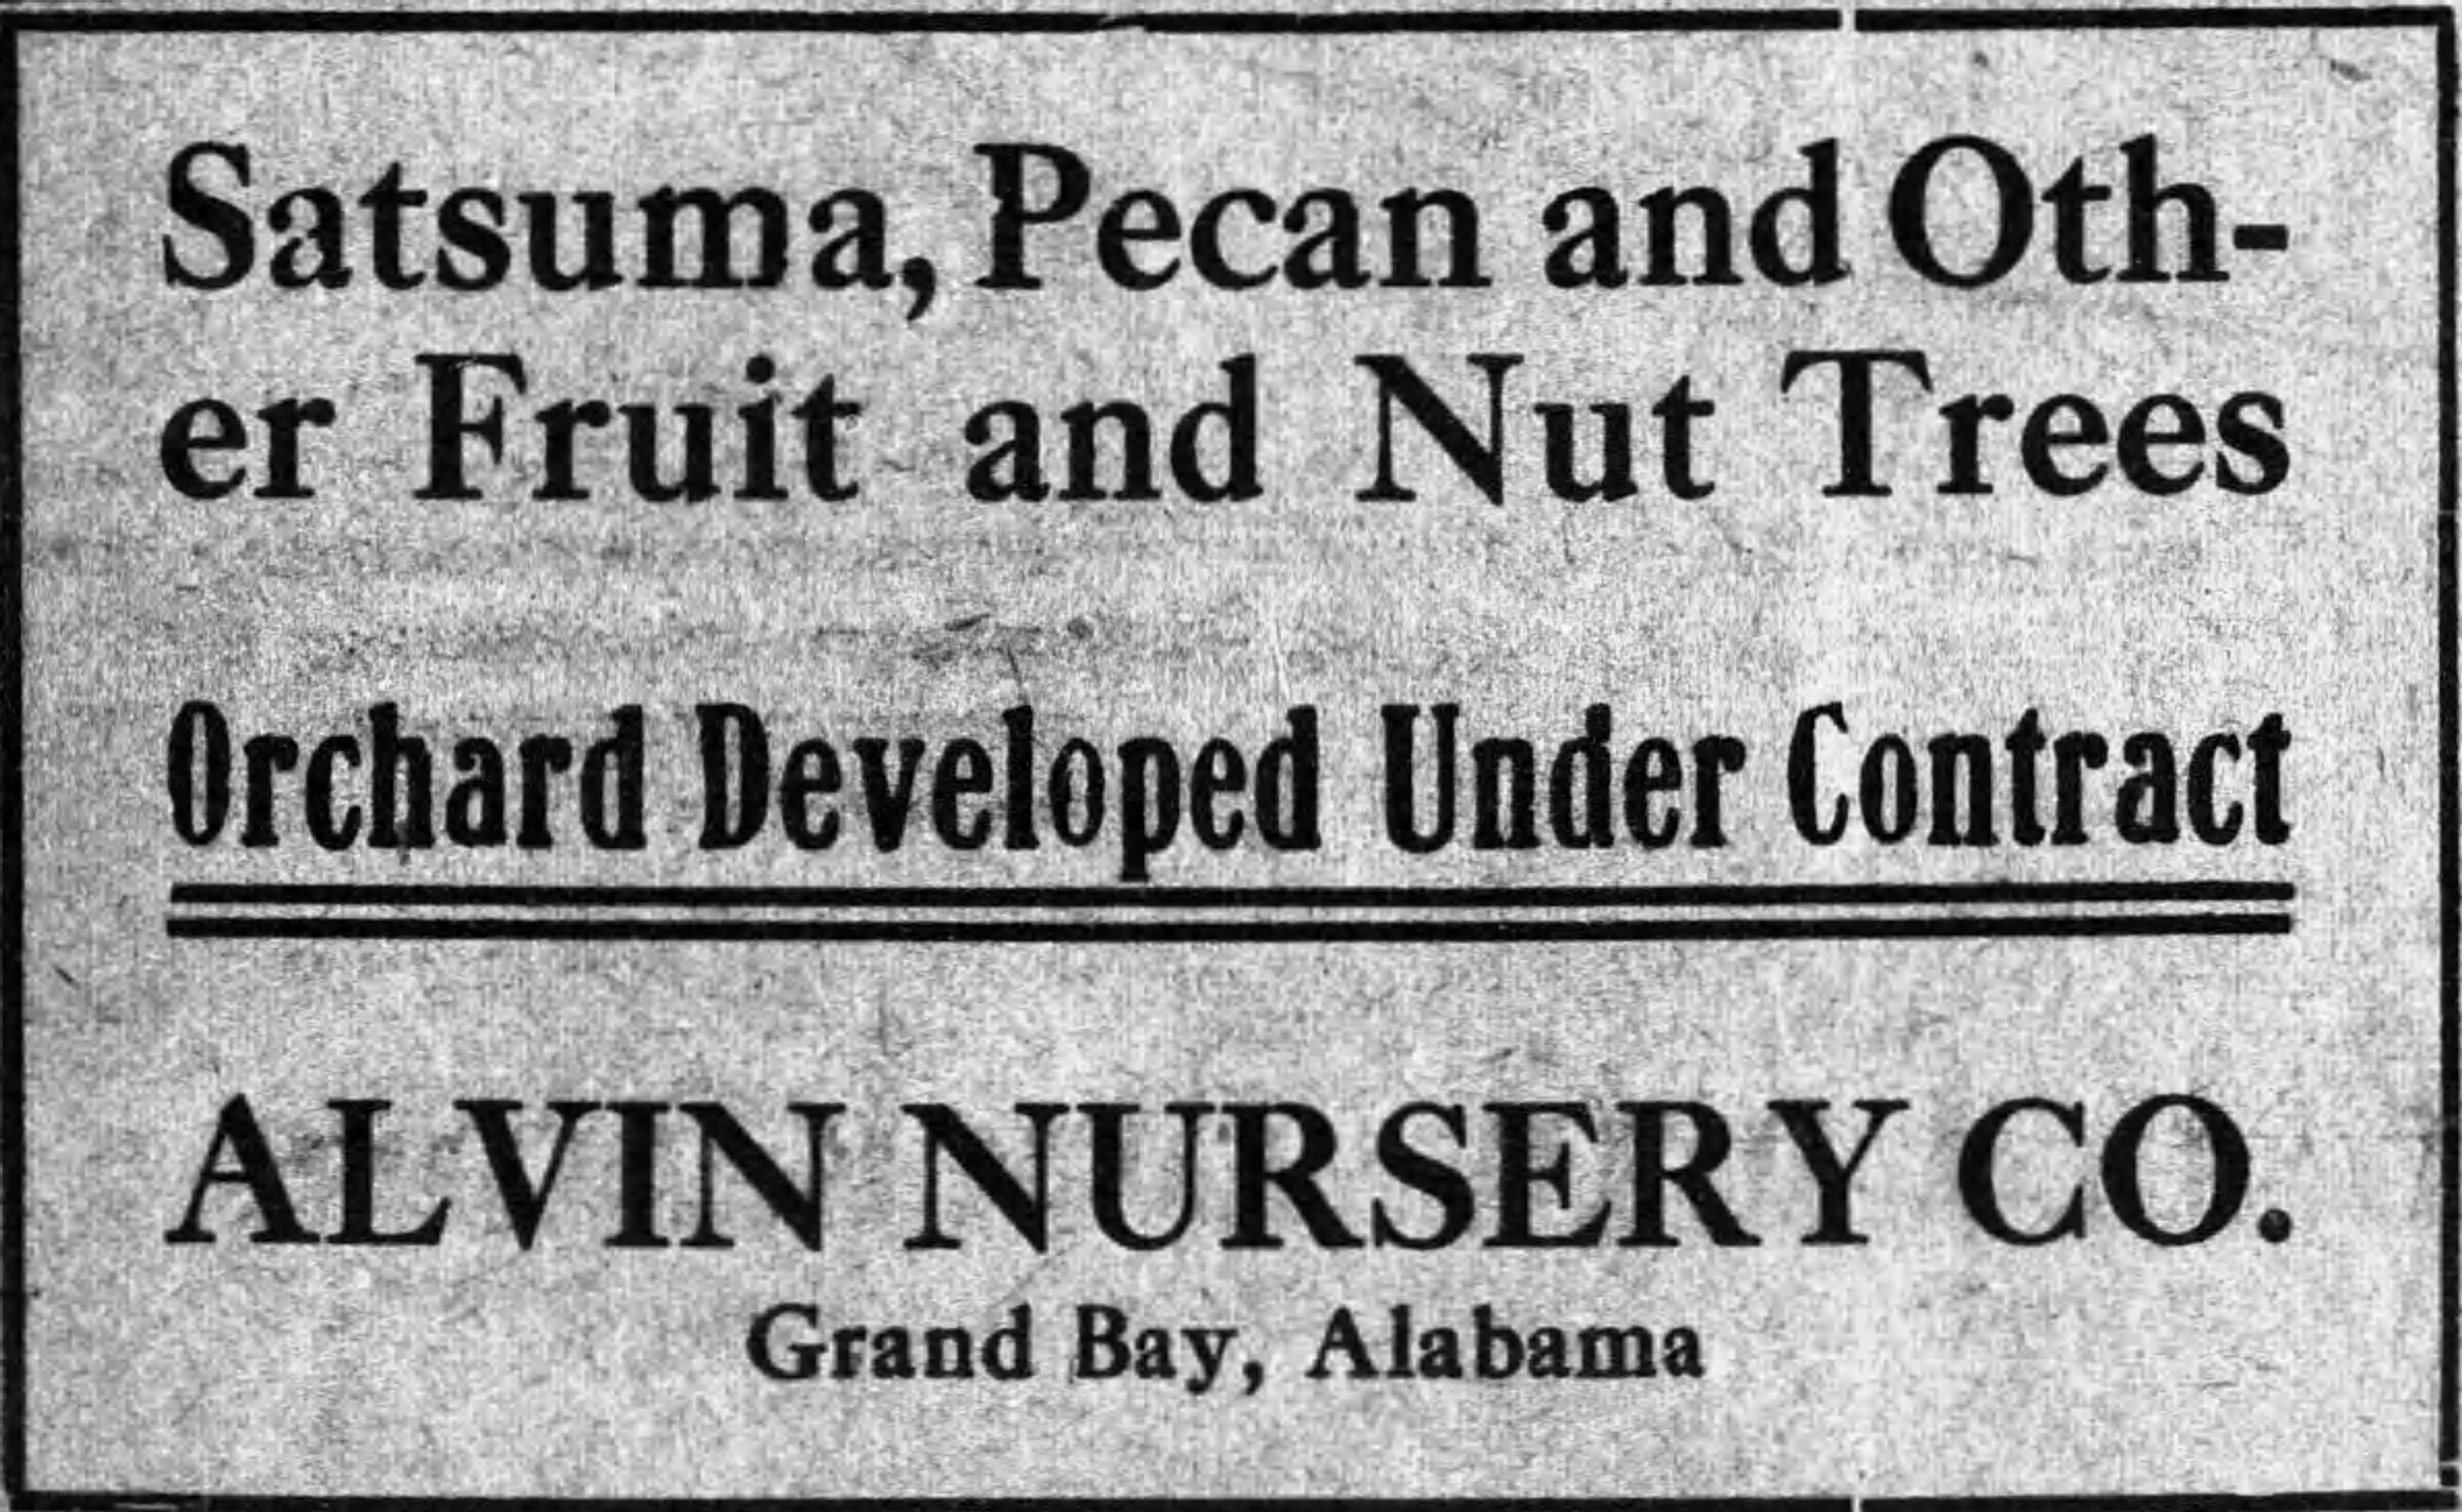 A gift from Japan created a whole new industry in Alabama in 1878.